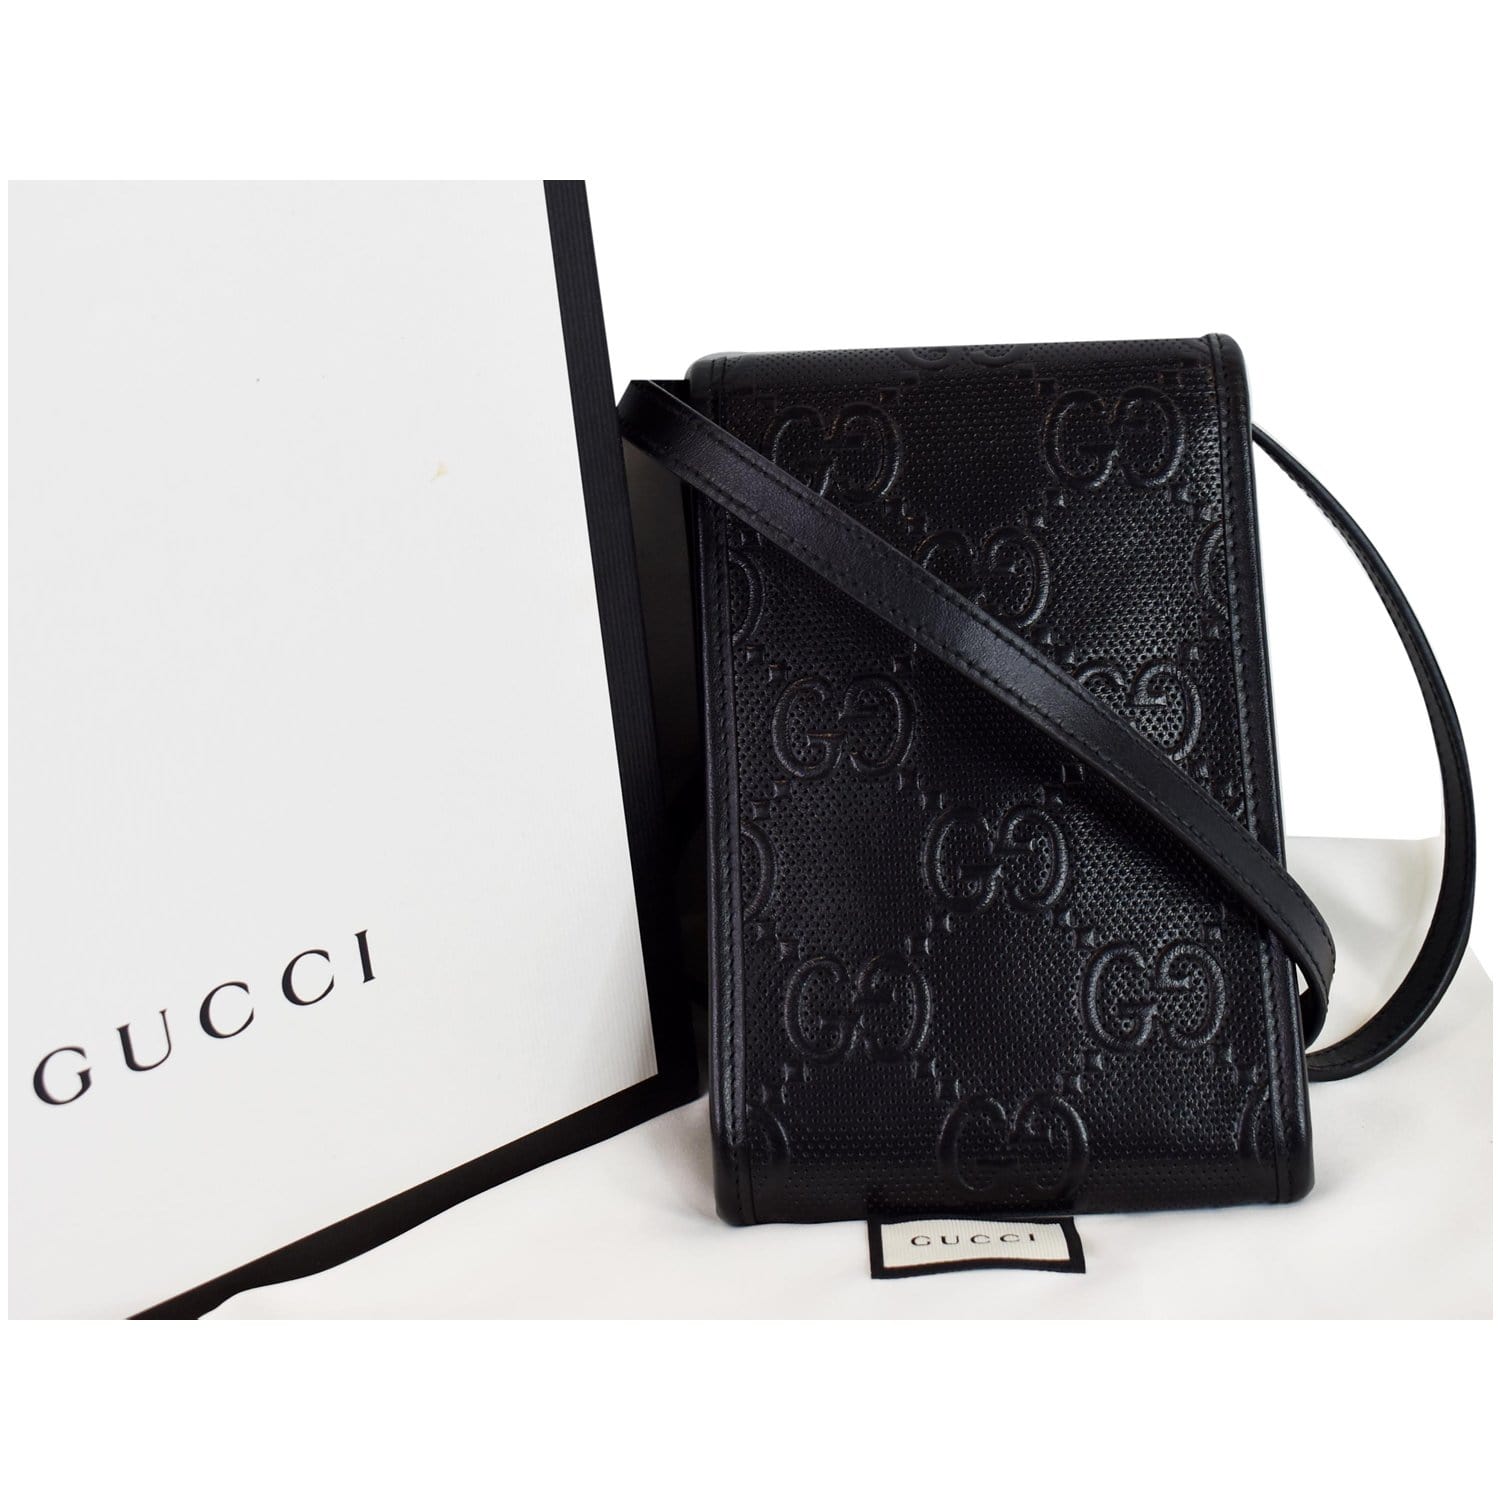 gucci embossed leather bag